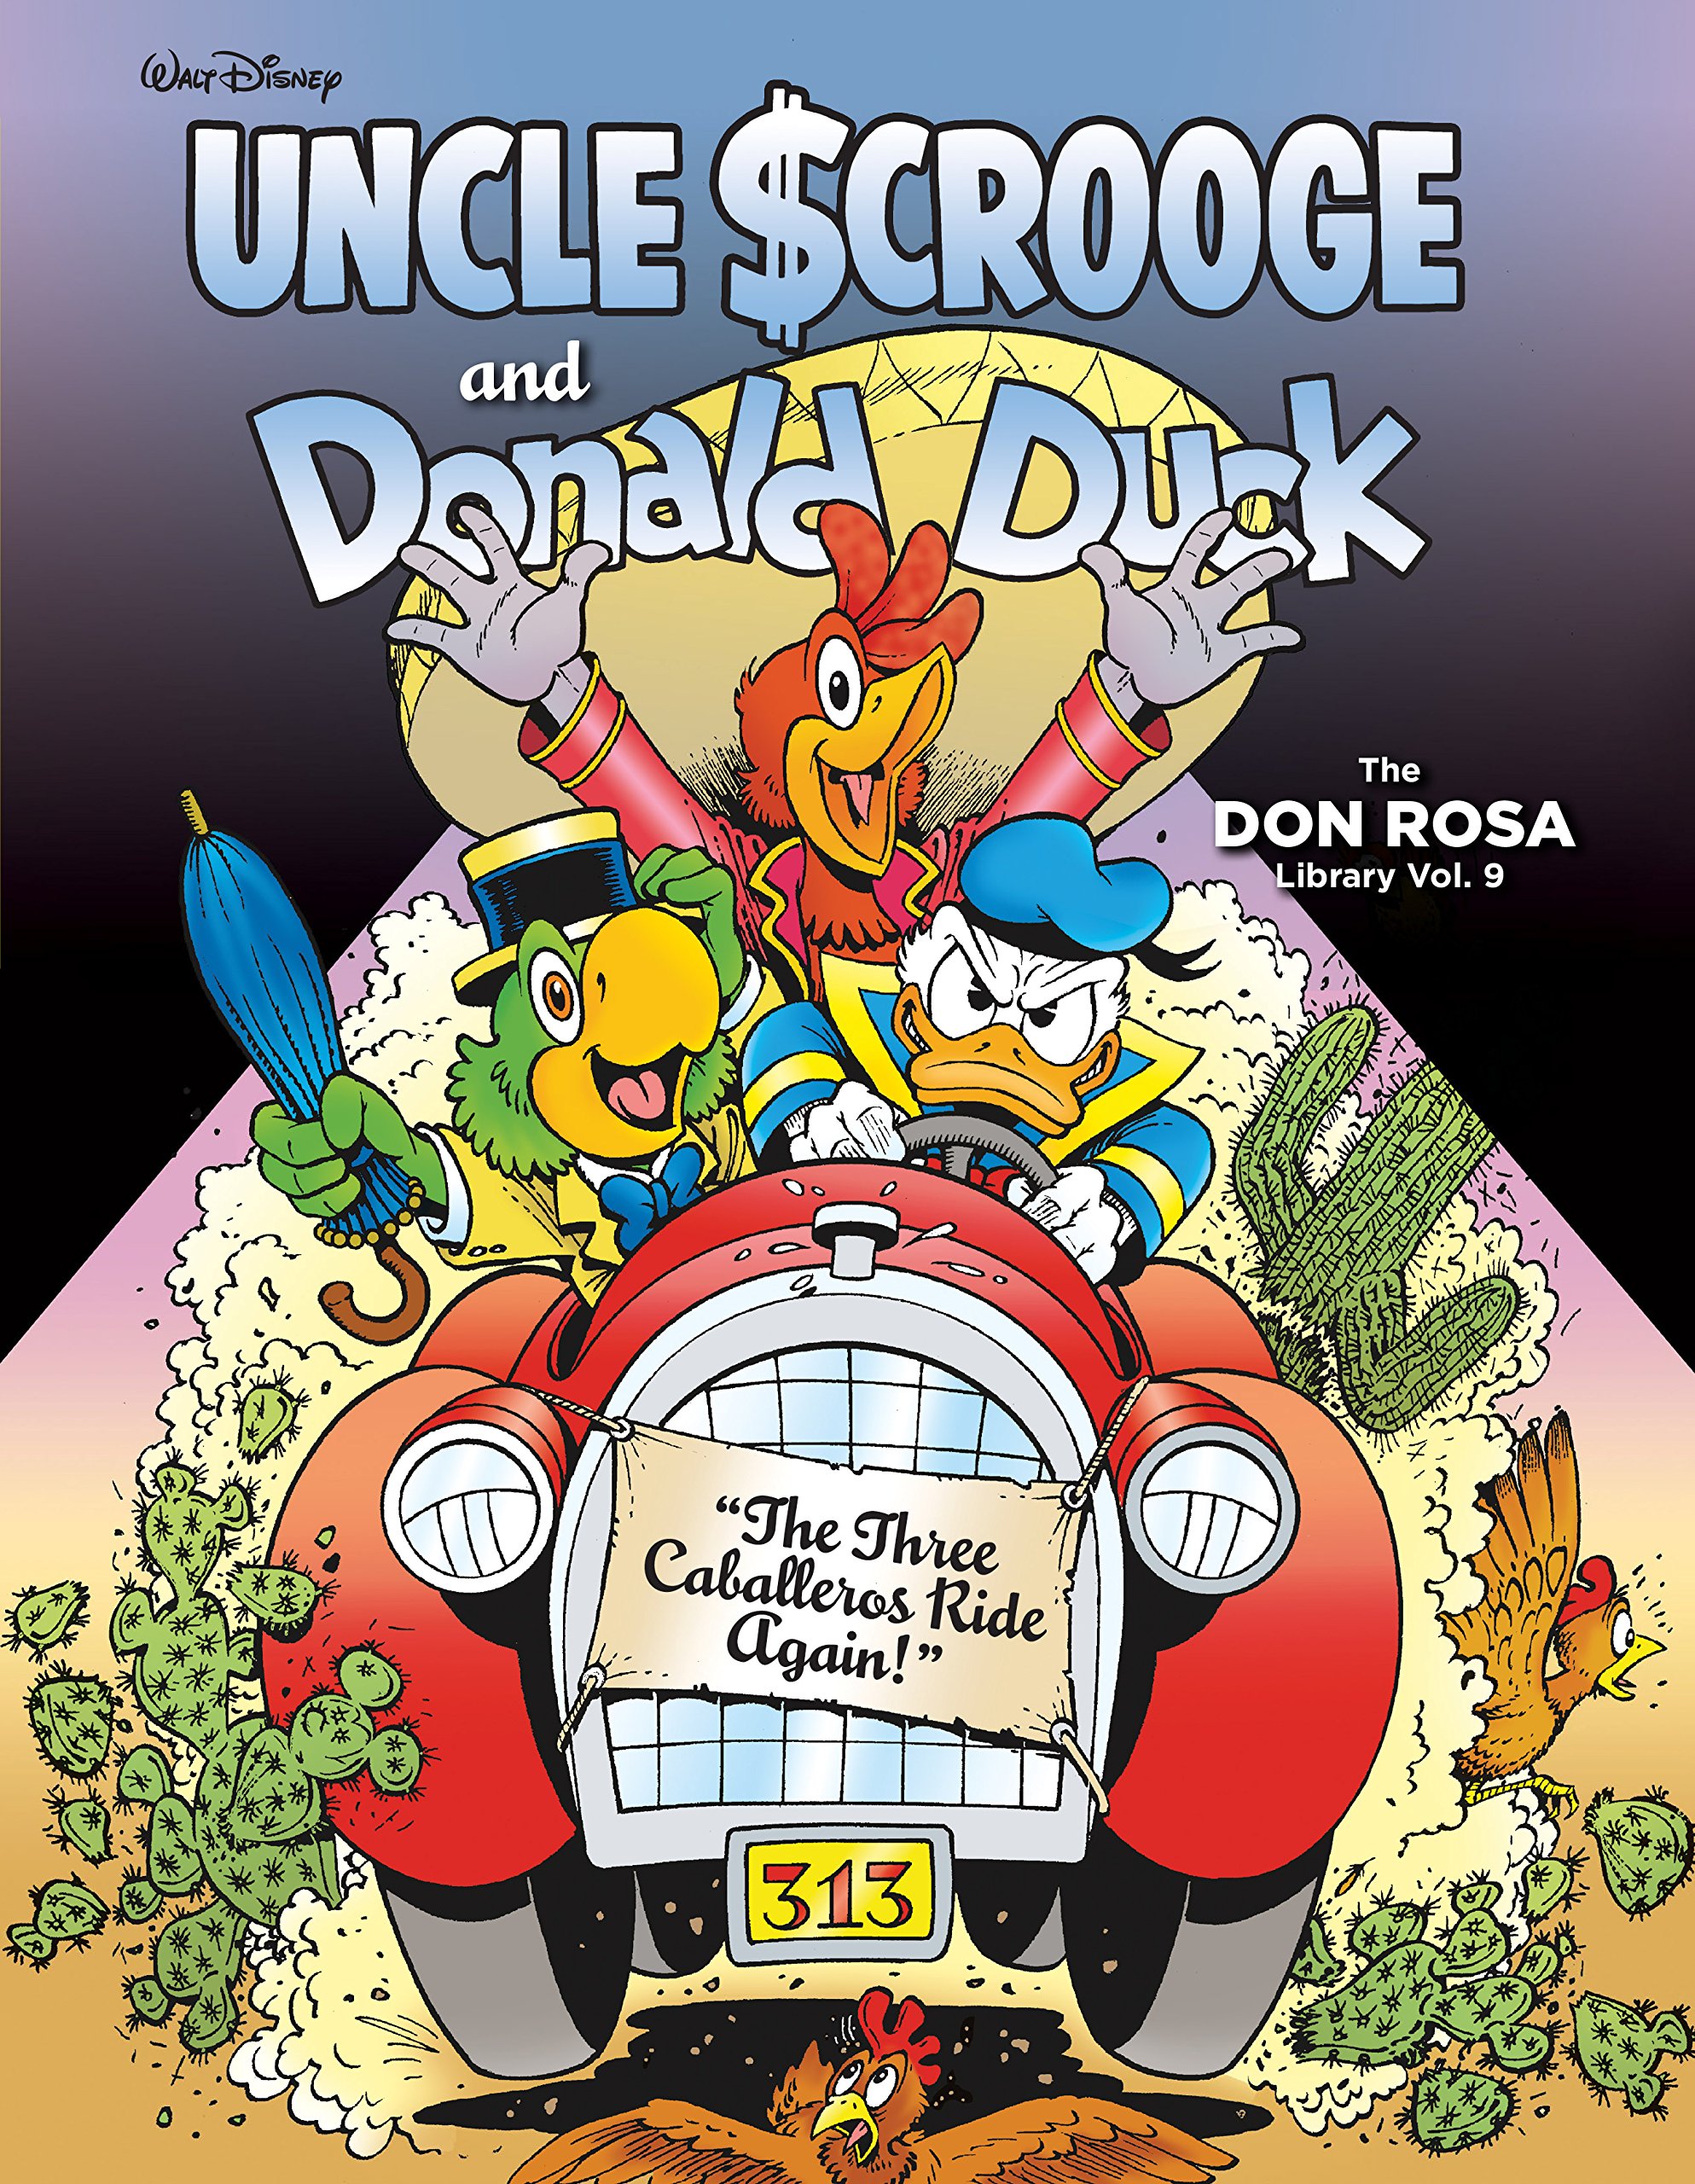 Walt Disney Uncle Scrooge and Donald Duck Vol. 9: The Three Caballeros Ride Again!: The Don Rosa Library Vol. 9